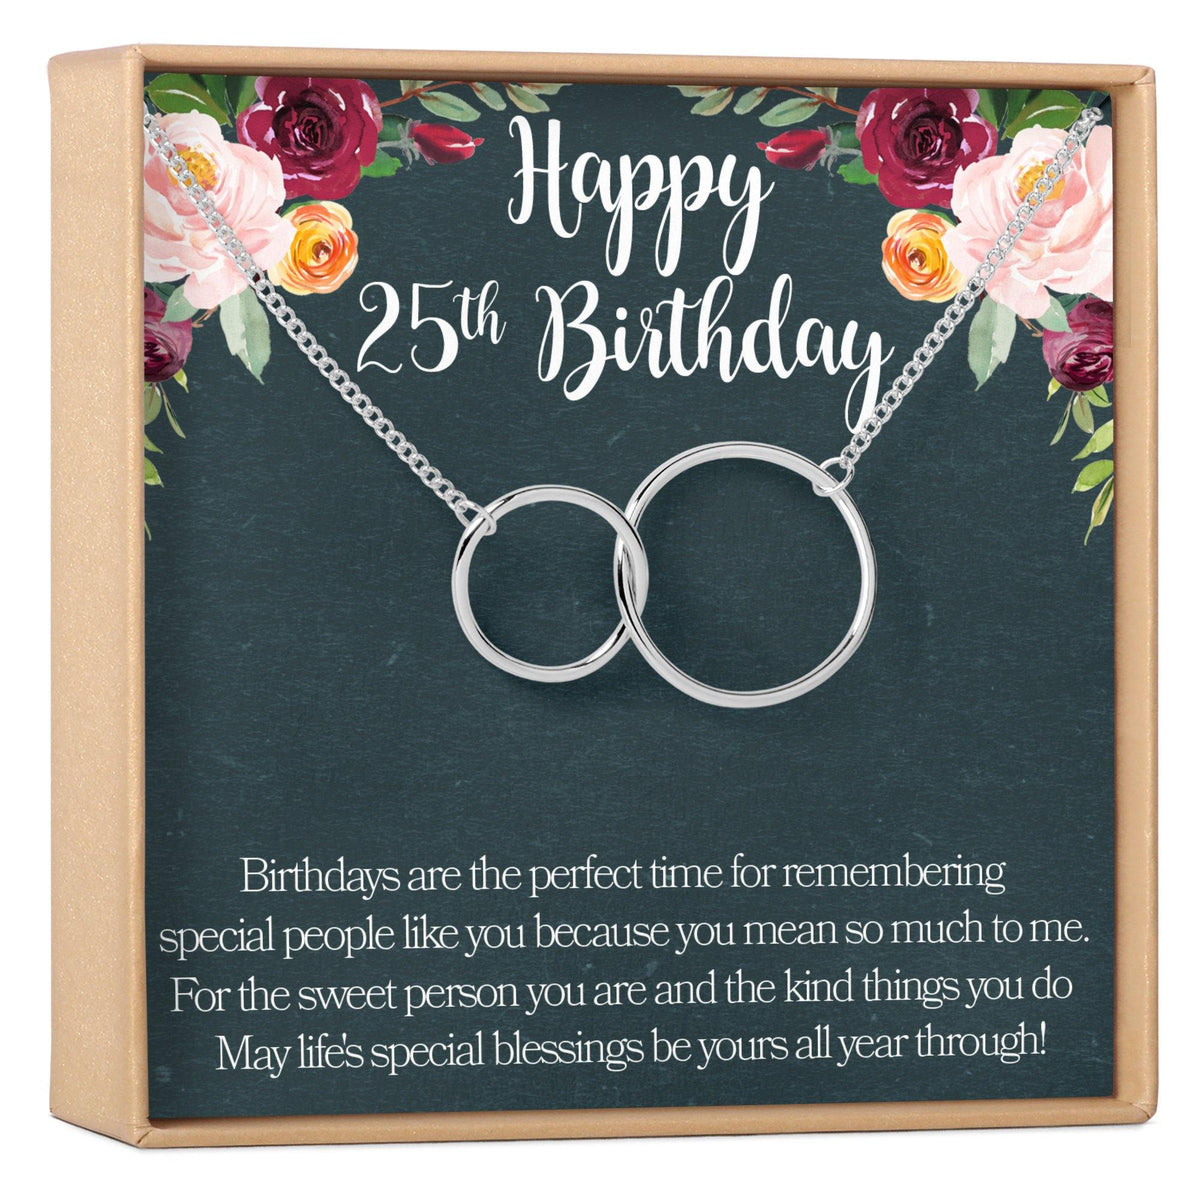 25th Birthday Necklace - Dear Ava, Jewelry / Necklaces / Pendants